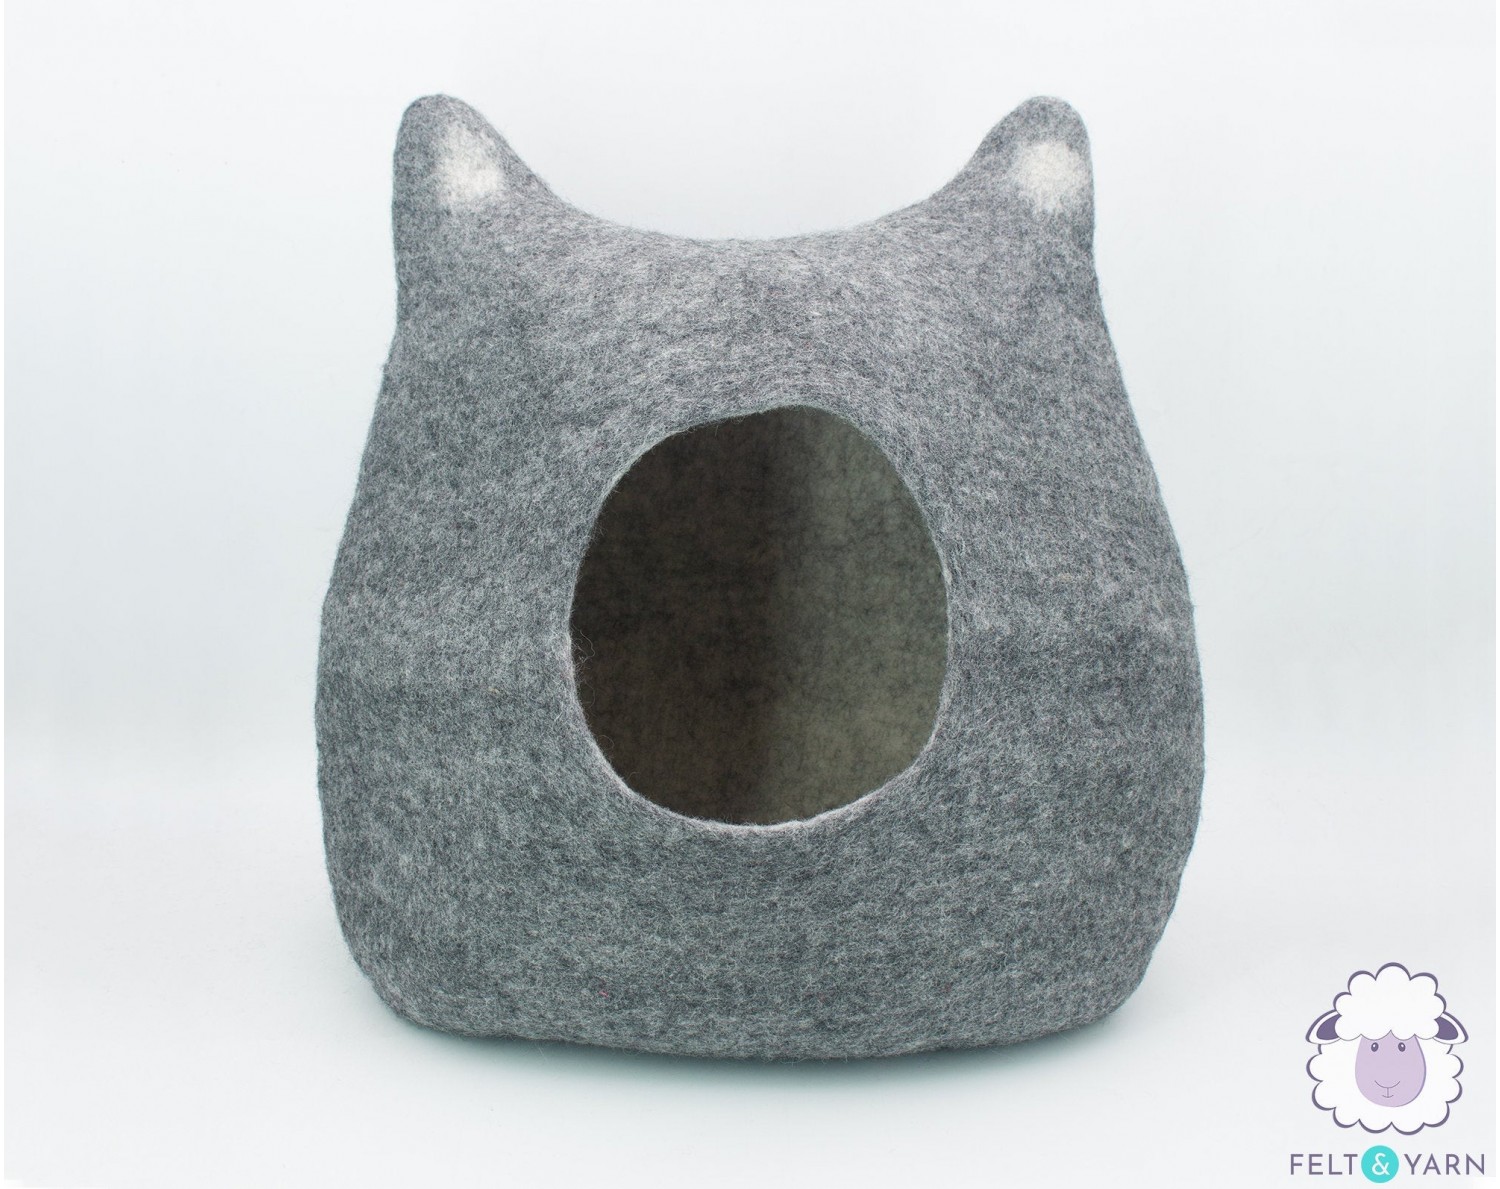 for Indoor Cozy Hideaway Handmade Premium Shaped Felt Makes Great Covered Cat House and Bed for Kitty Purple Rain Tip 100% Natural Wool Large Cat Cave Large Pod Soft Hooded Bed Area.